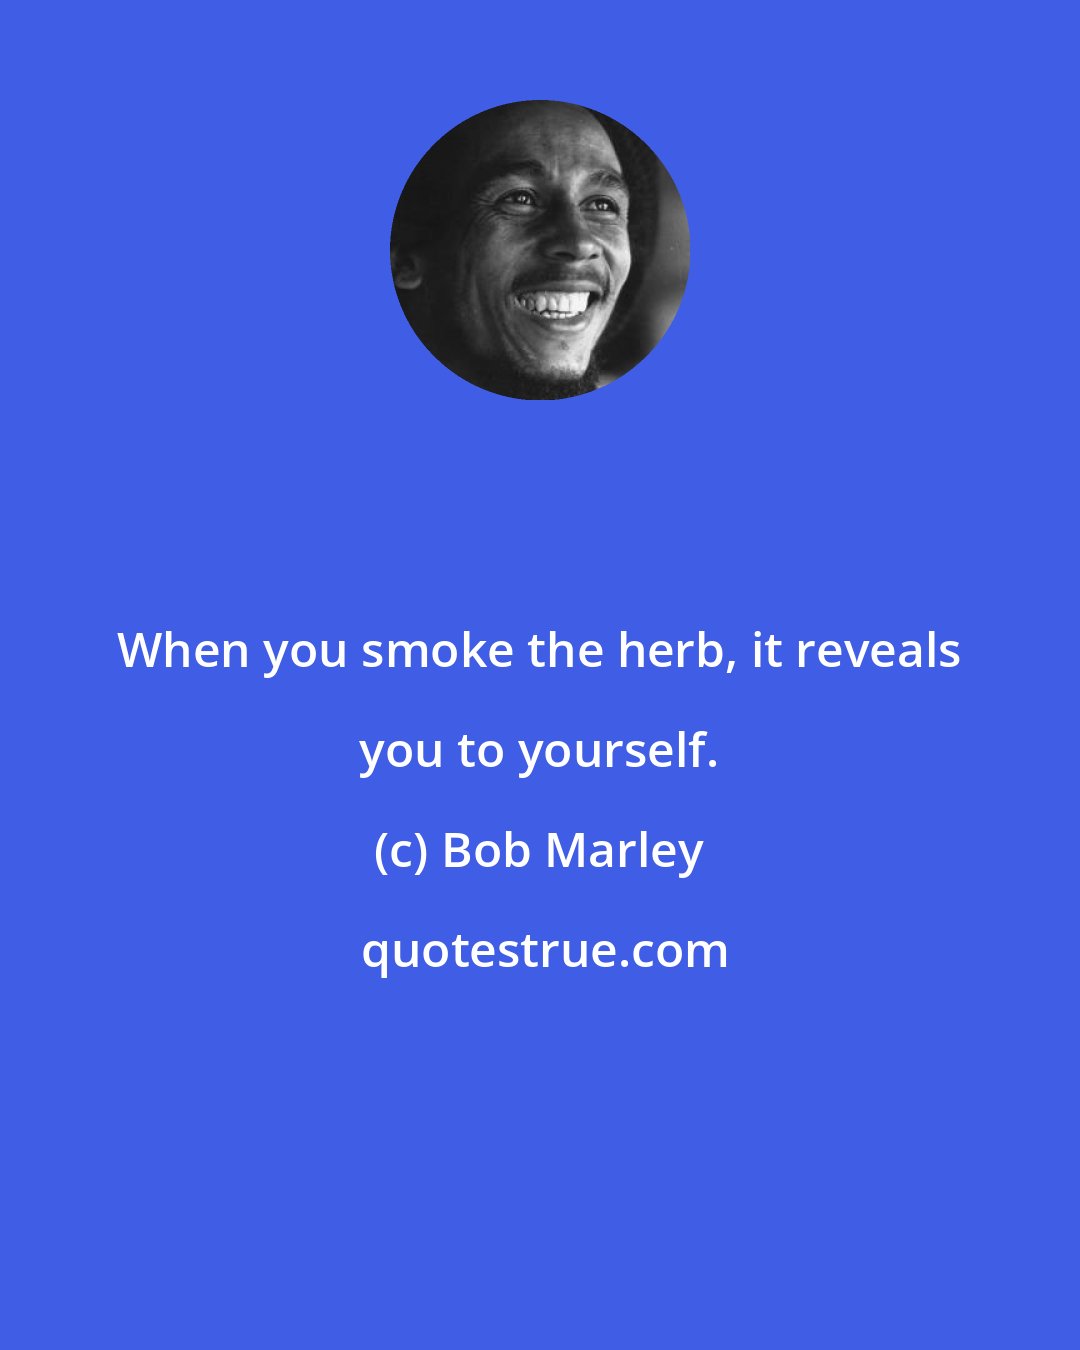 Bob Marley: When you smoke the herb, it reveals you to yourself.